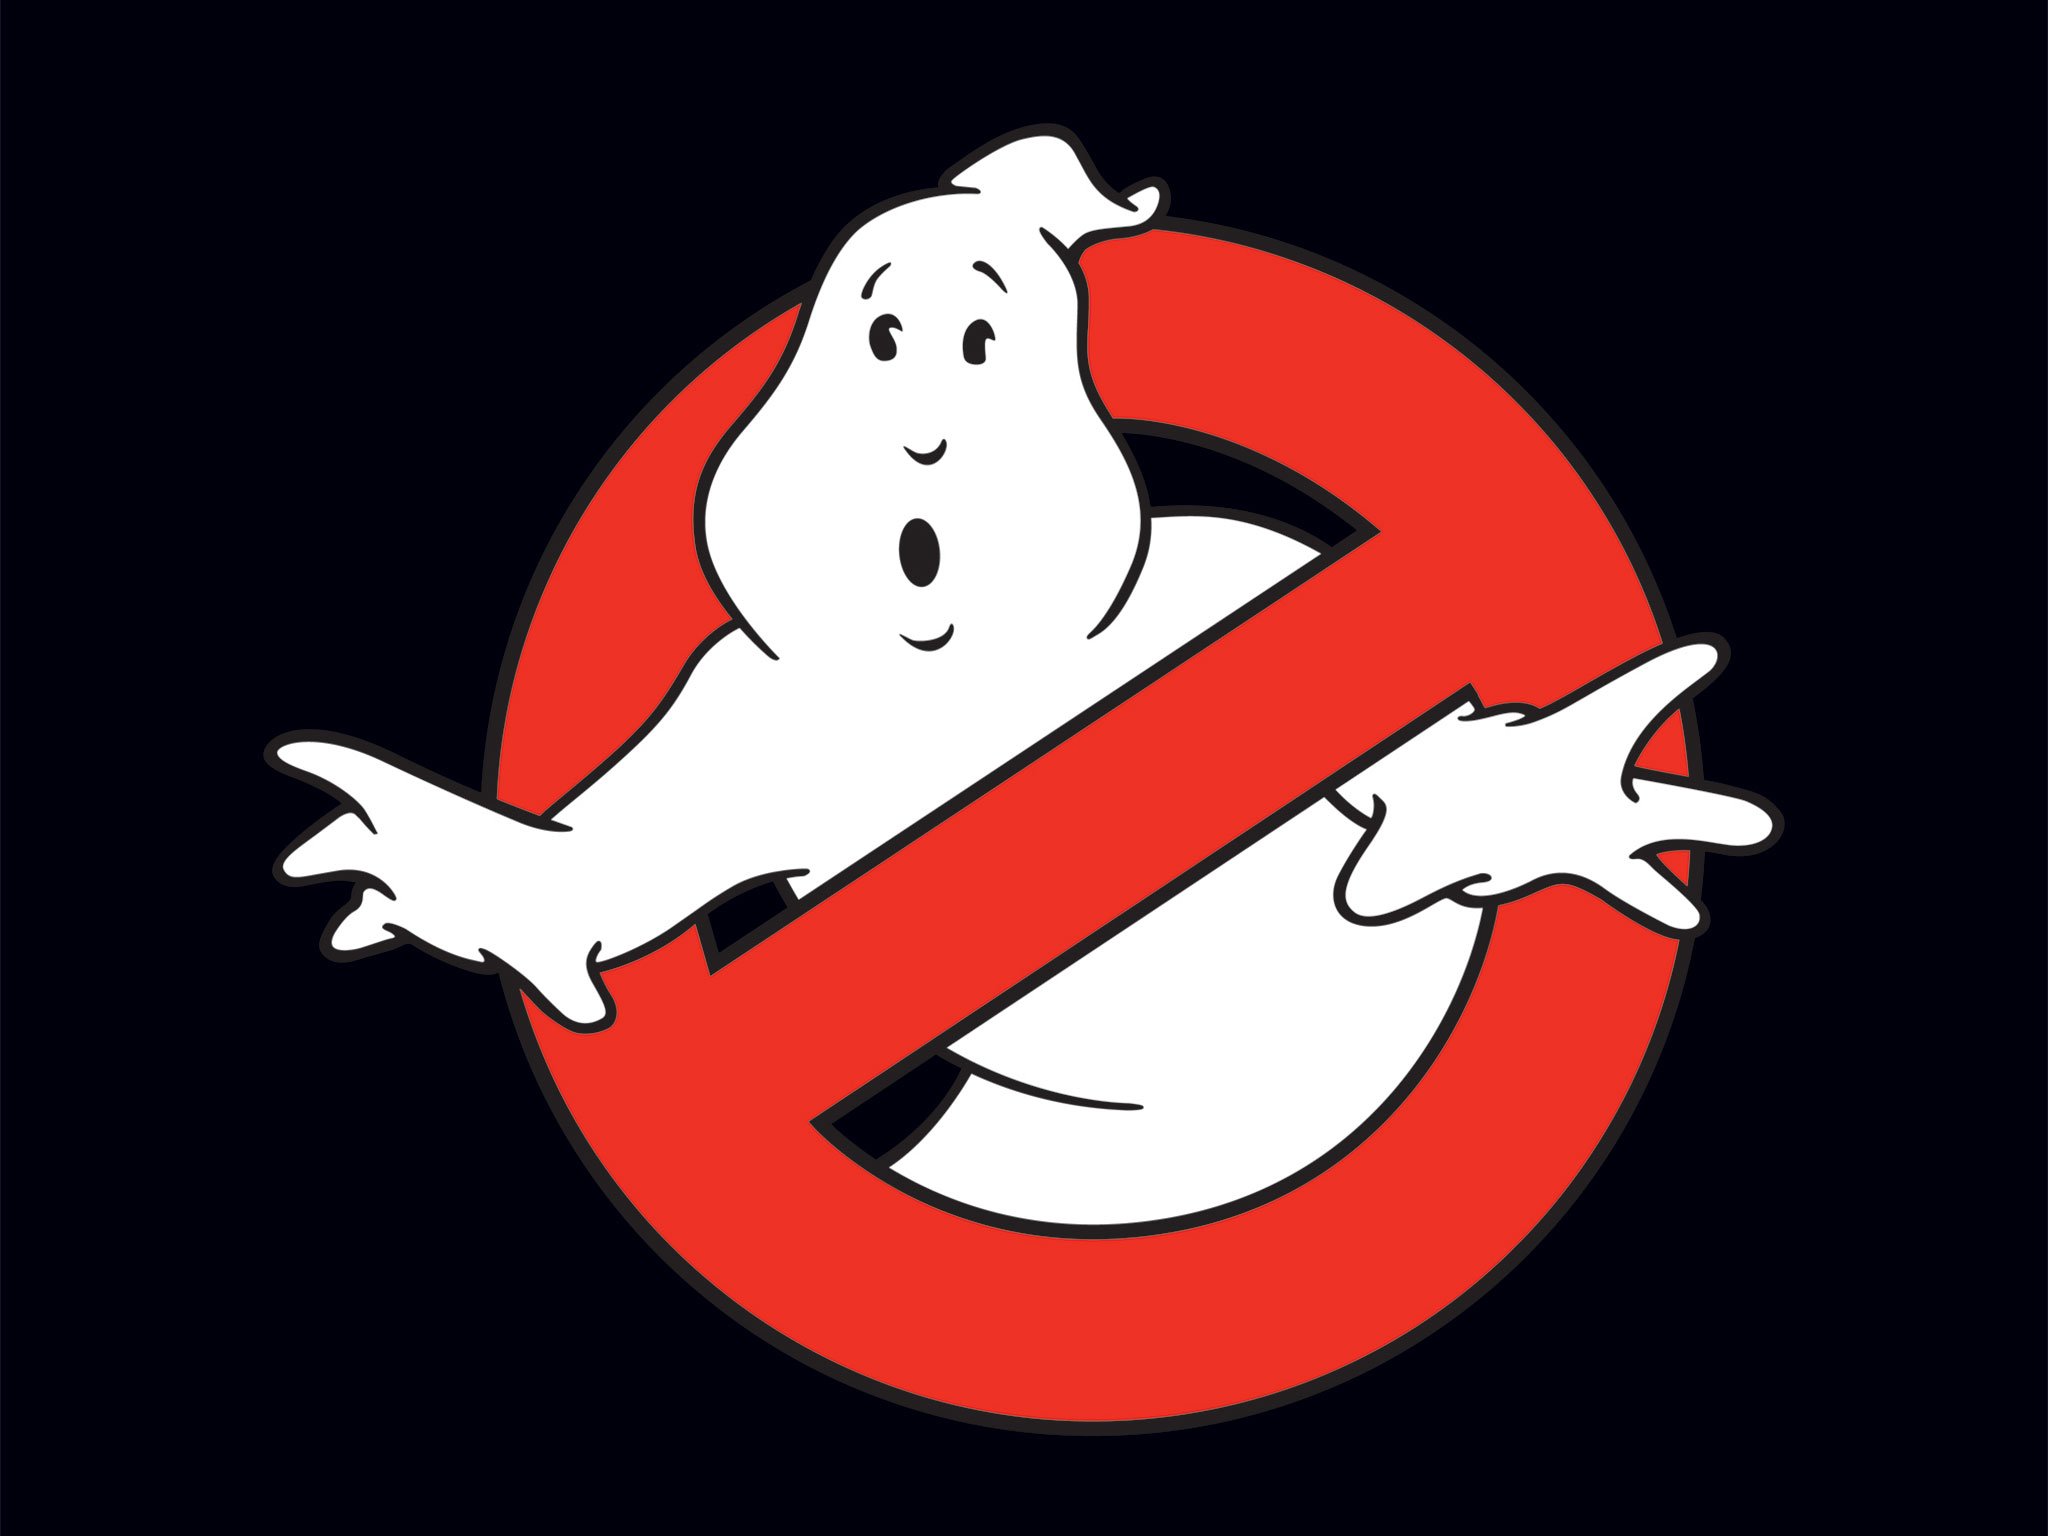 Review 36: Ghostbusters 30th anniversary!